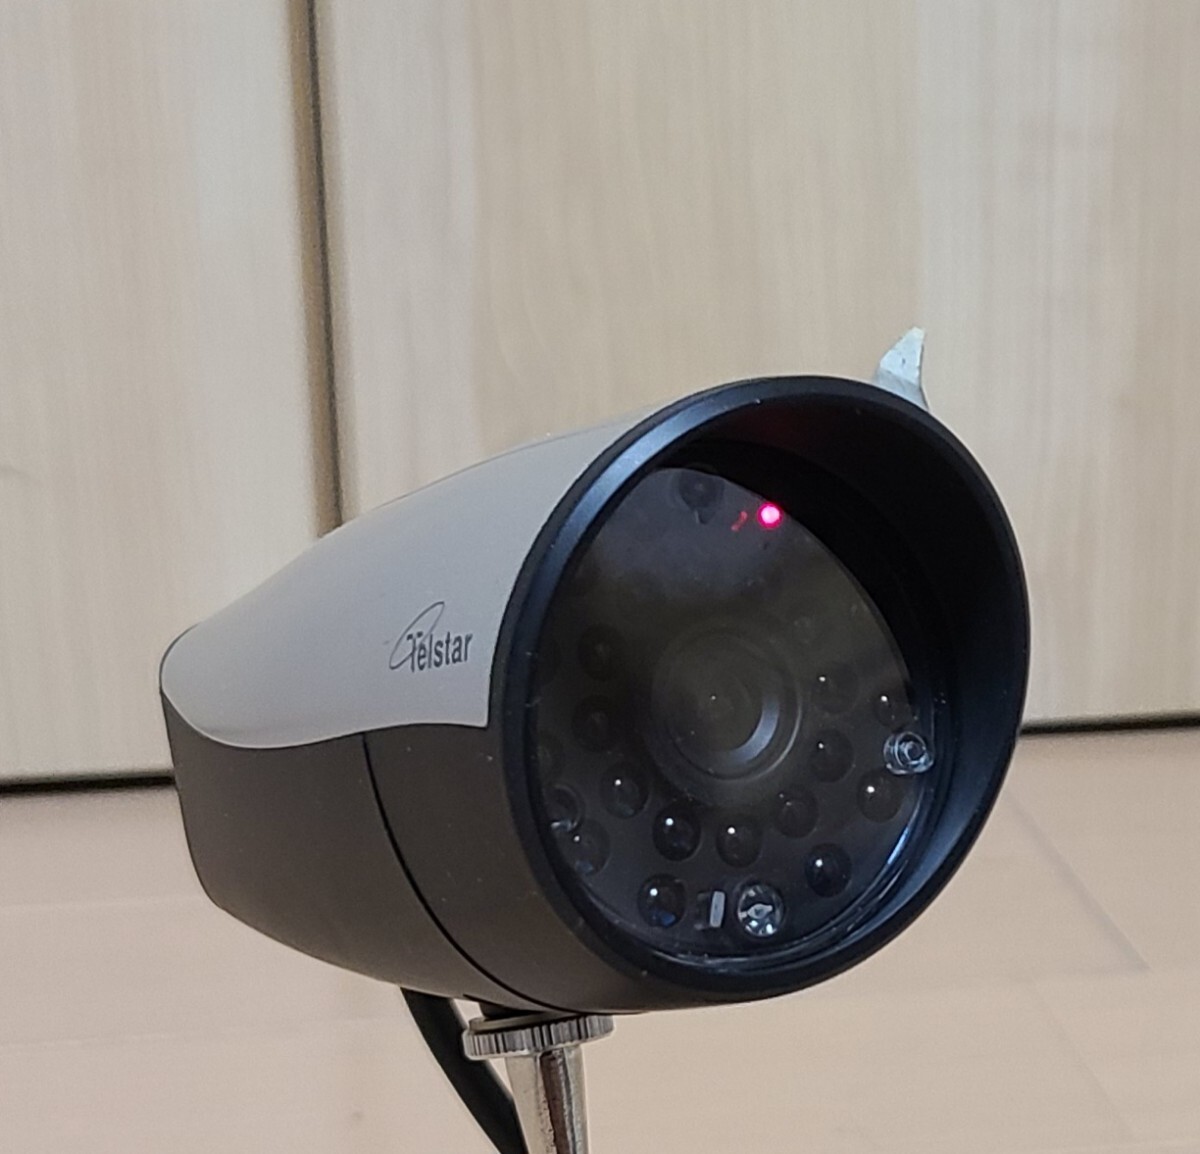  see protection . monitoring camera TR-X50WCP / TR-X50R wireless security crime prevention used * explanation field obligatory reading 